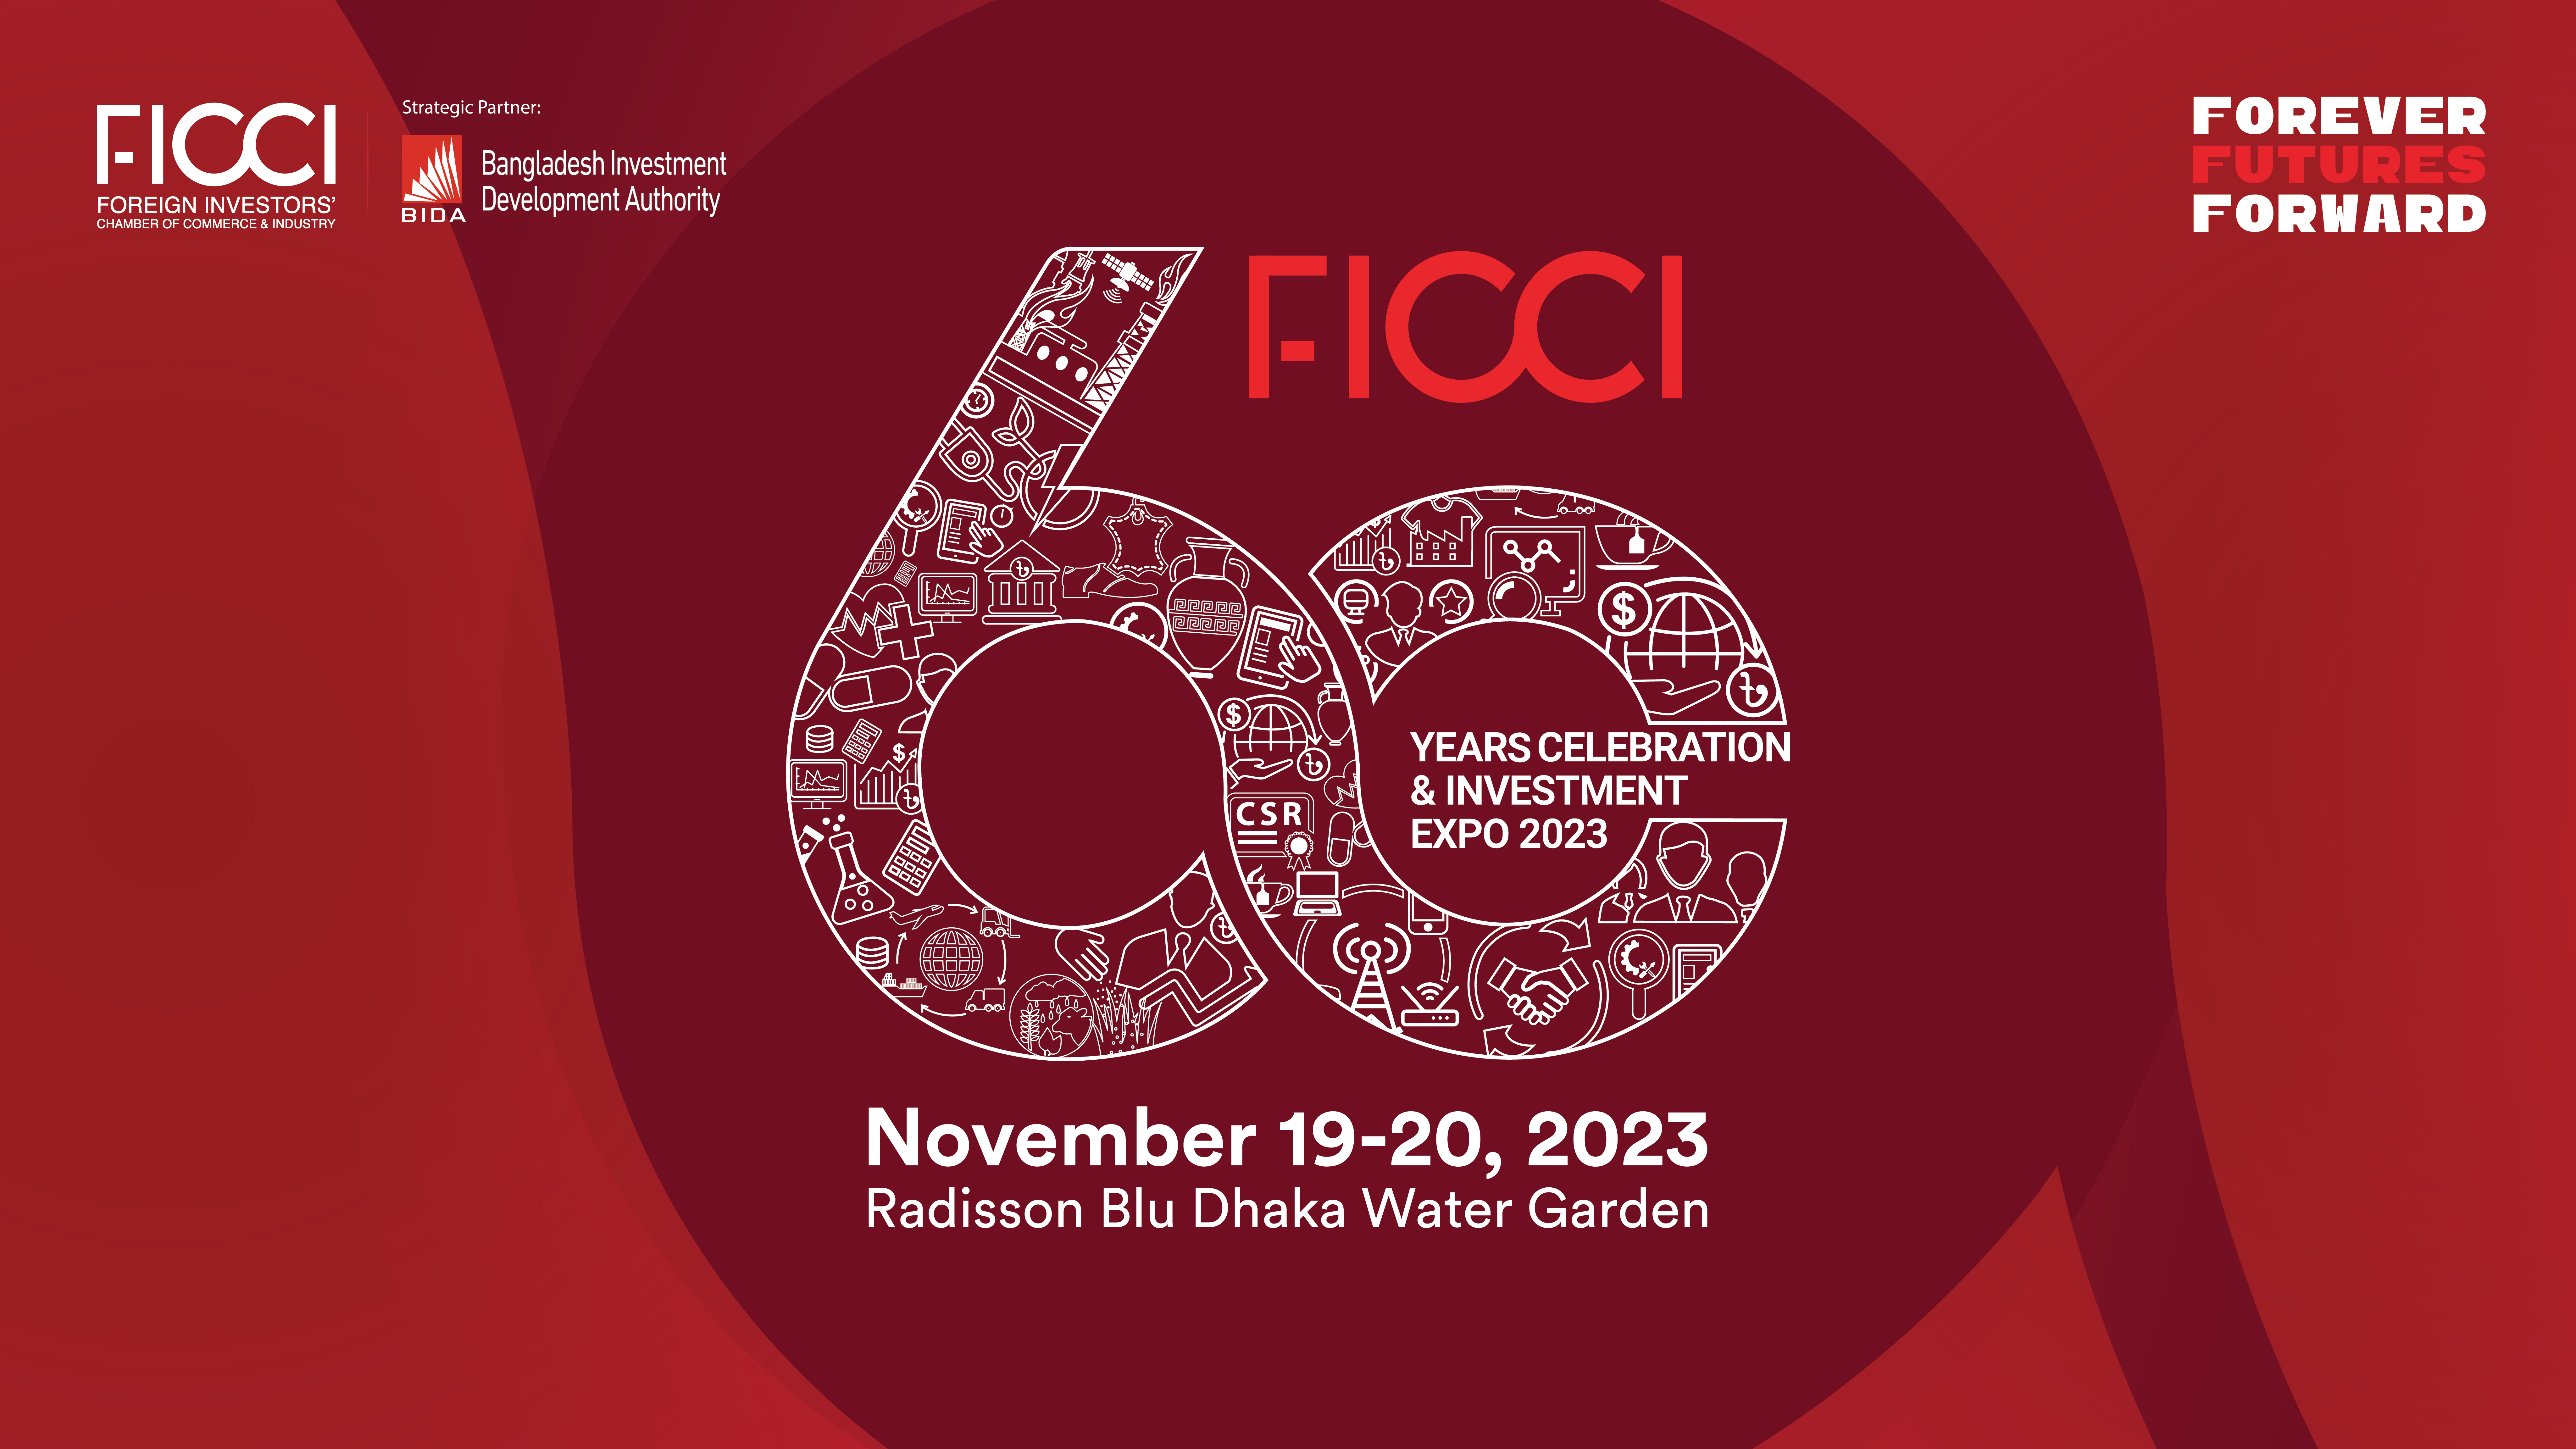 FICCI 60 Years Celebration & Investment Expo 2023 rescheduled on 19 November